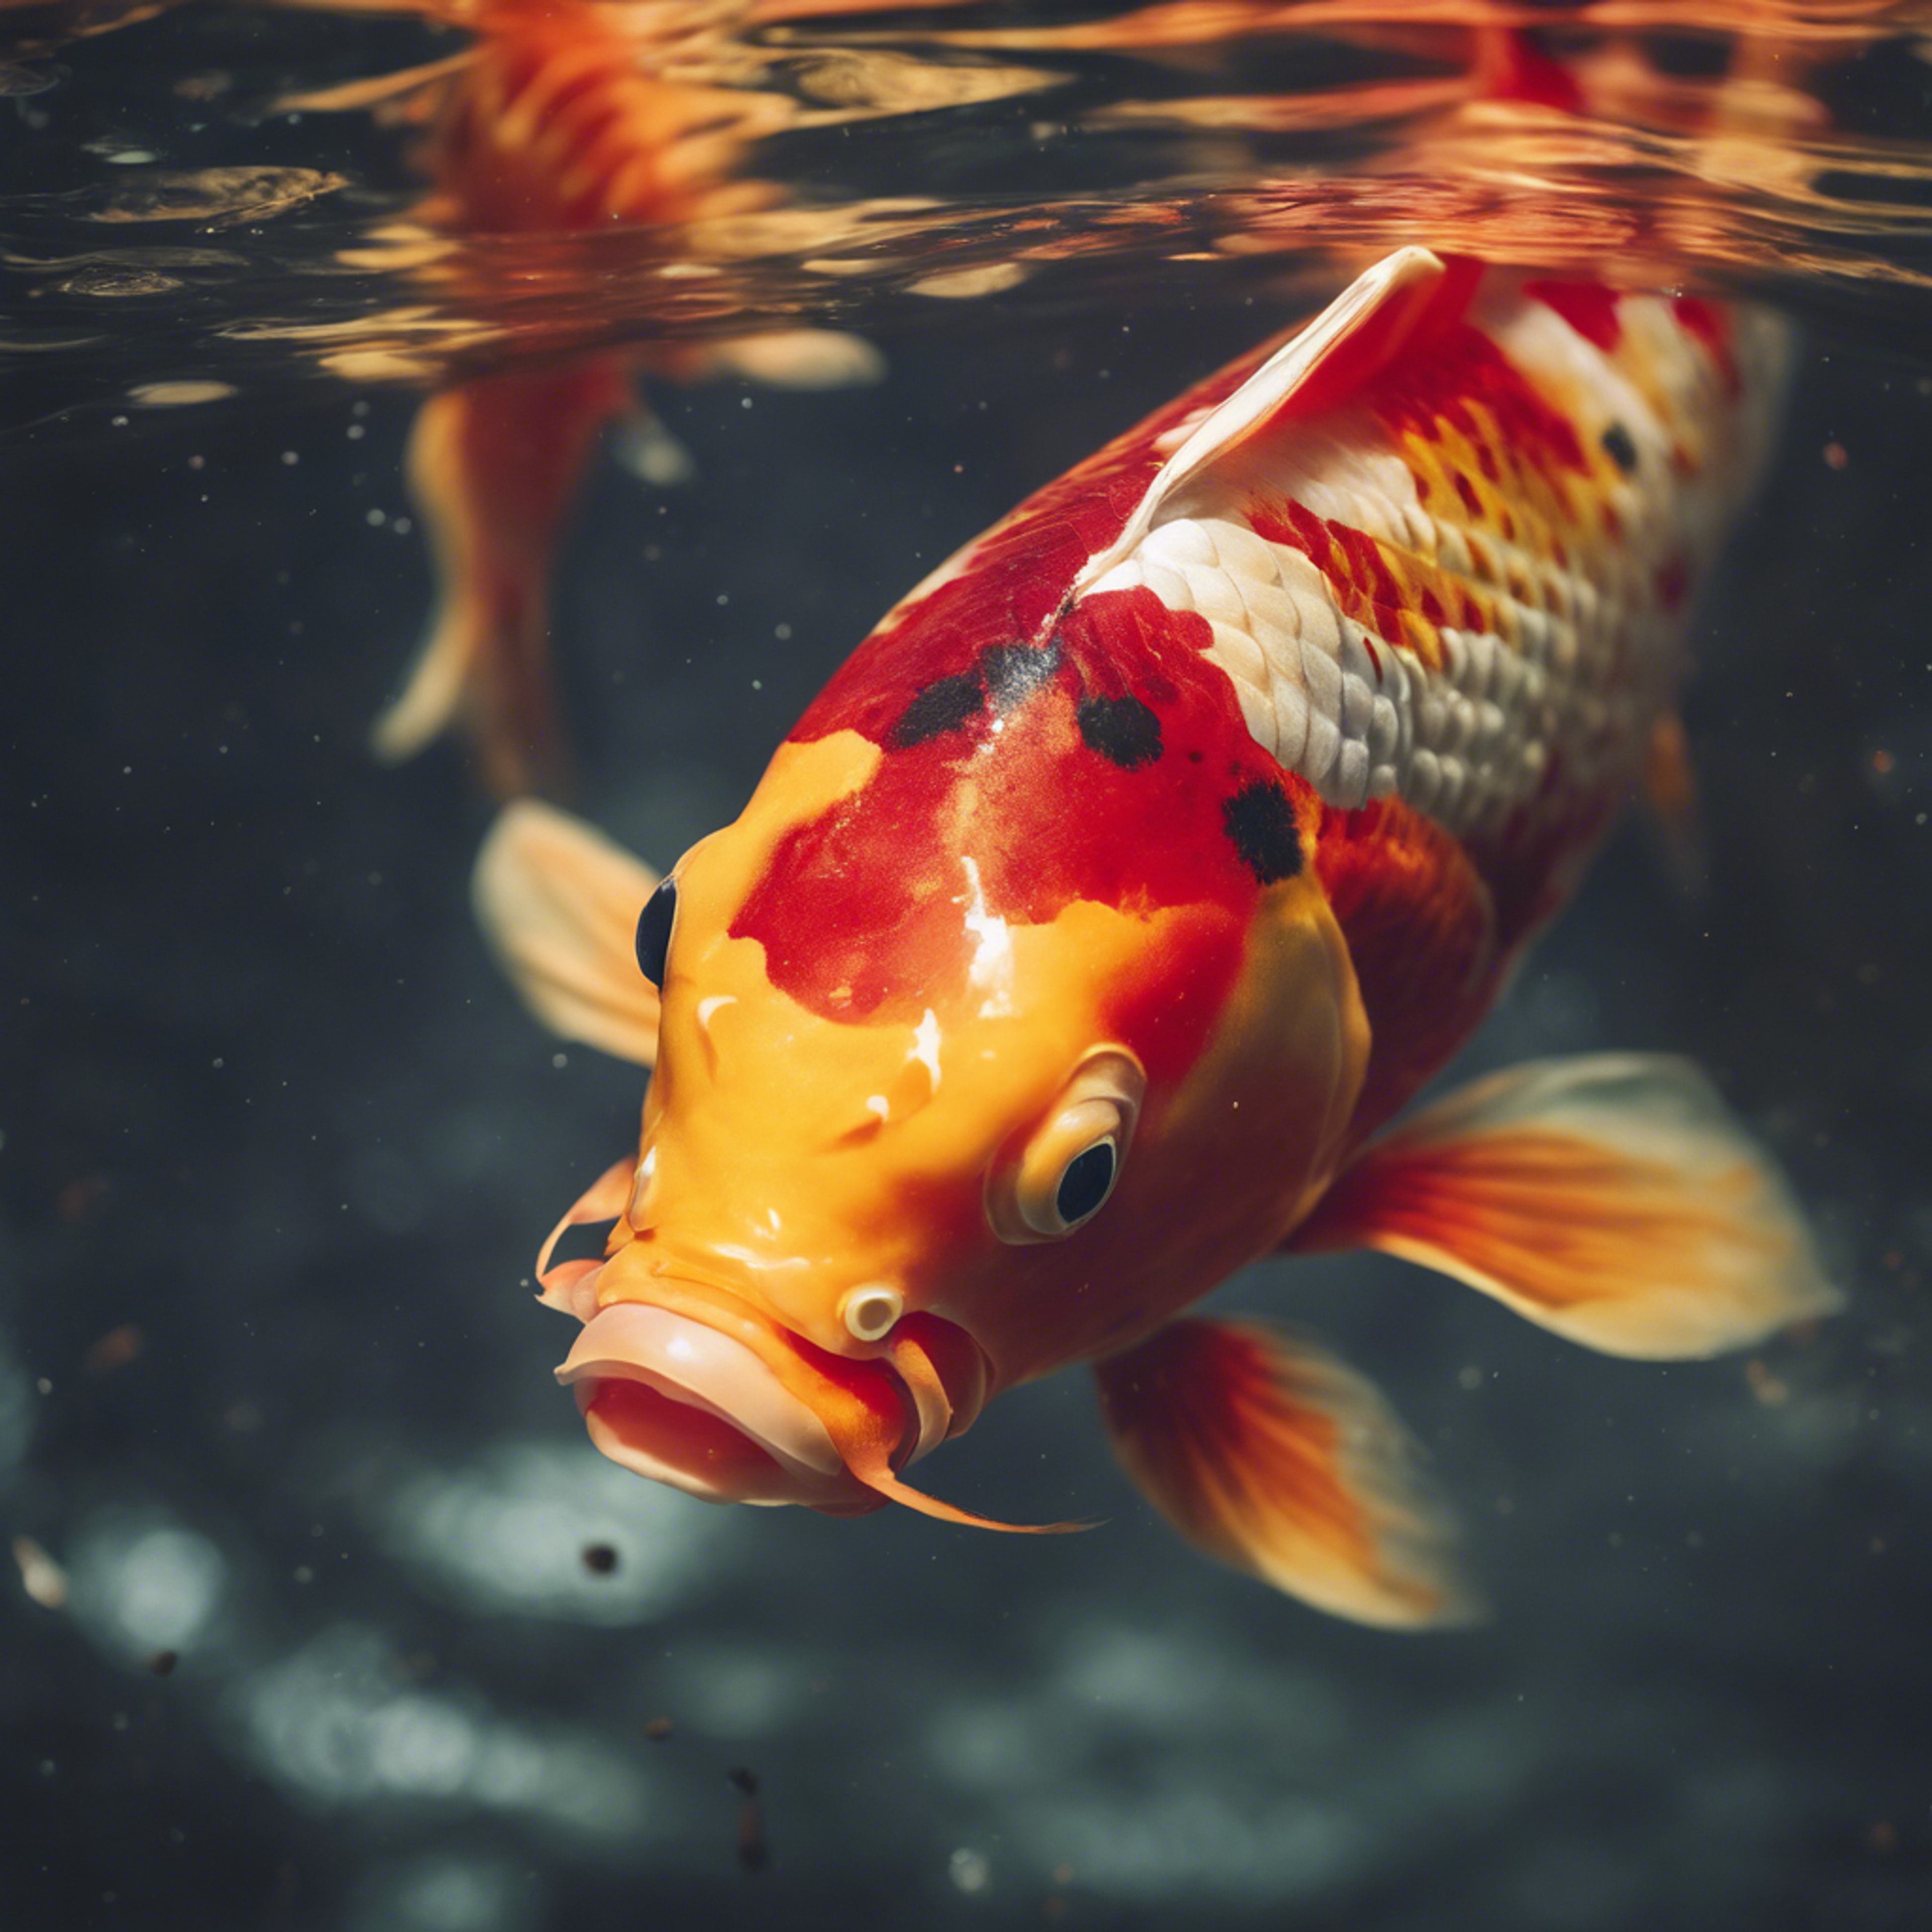 A vibrant red and gold koi fish swimming in a clear pond. Tapet[1dfeb98f60cb429caecb]